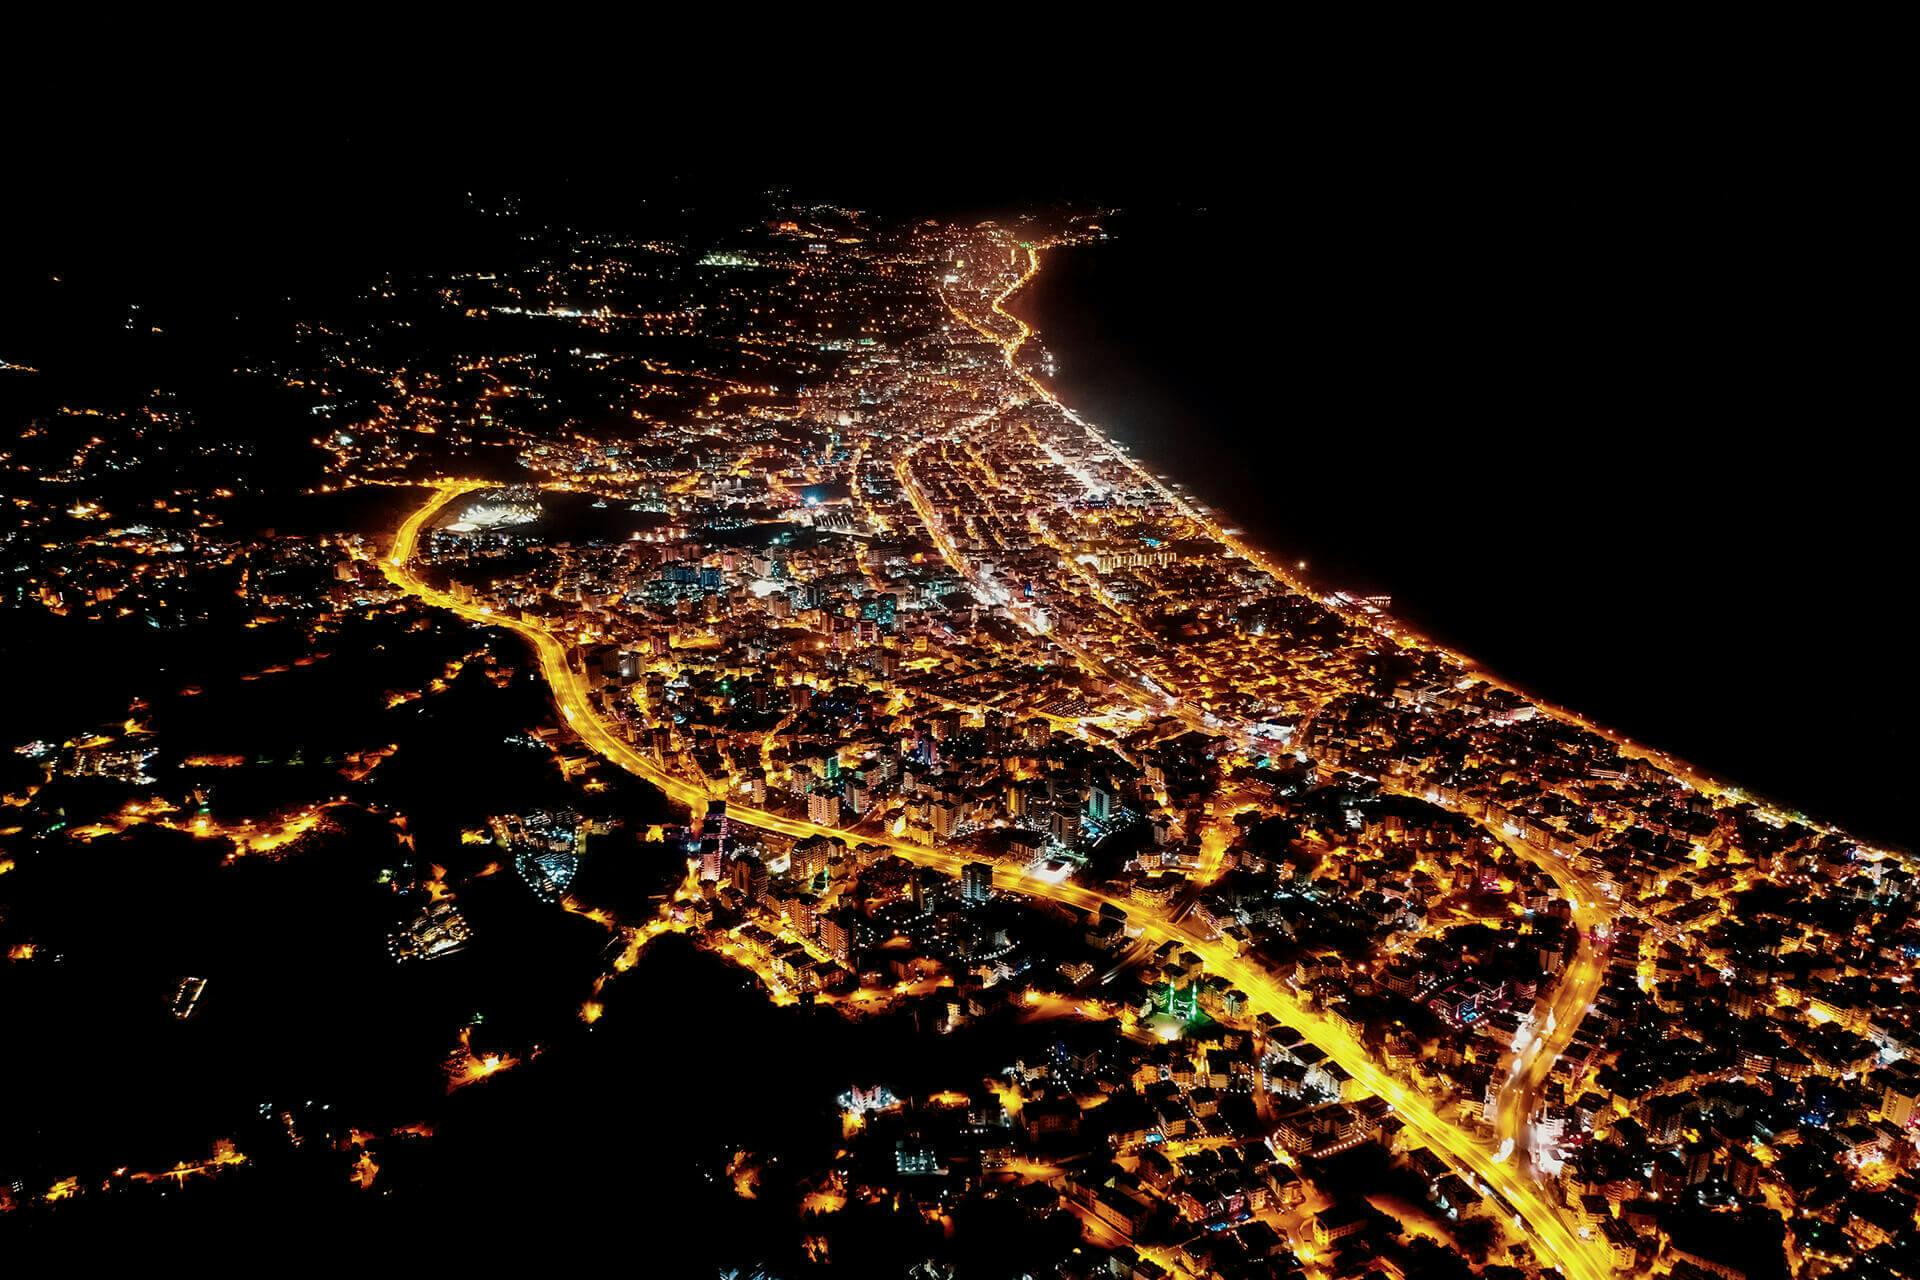 lit up coastal city at night seen from above